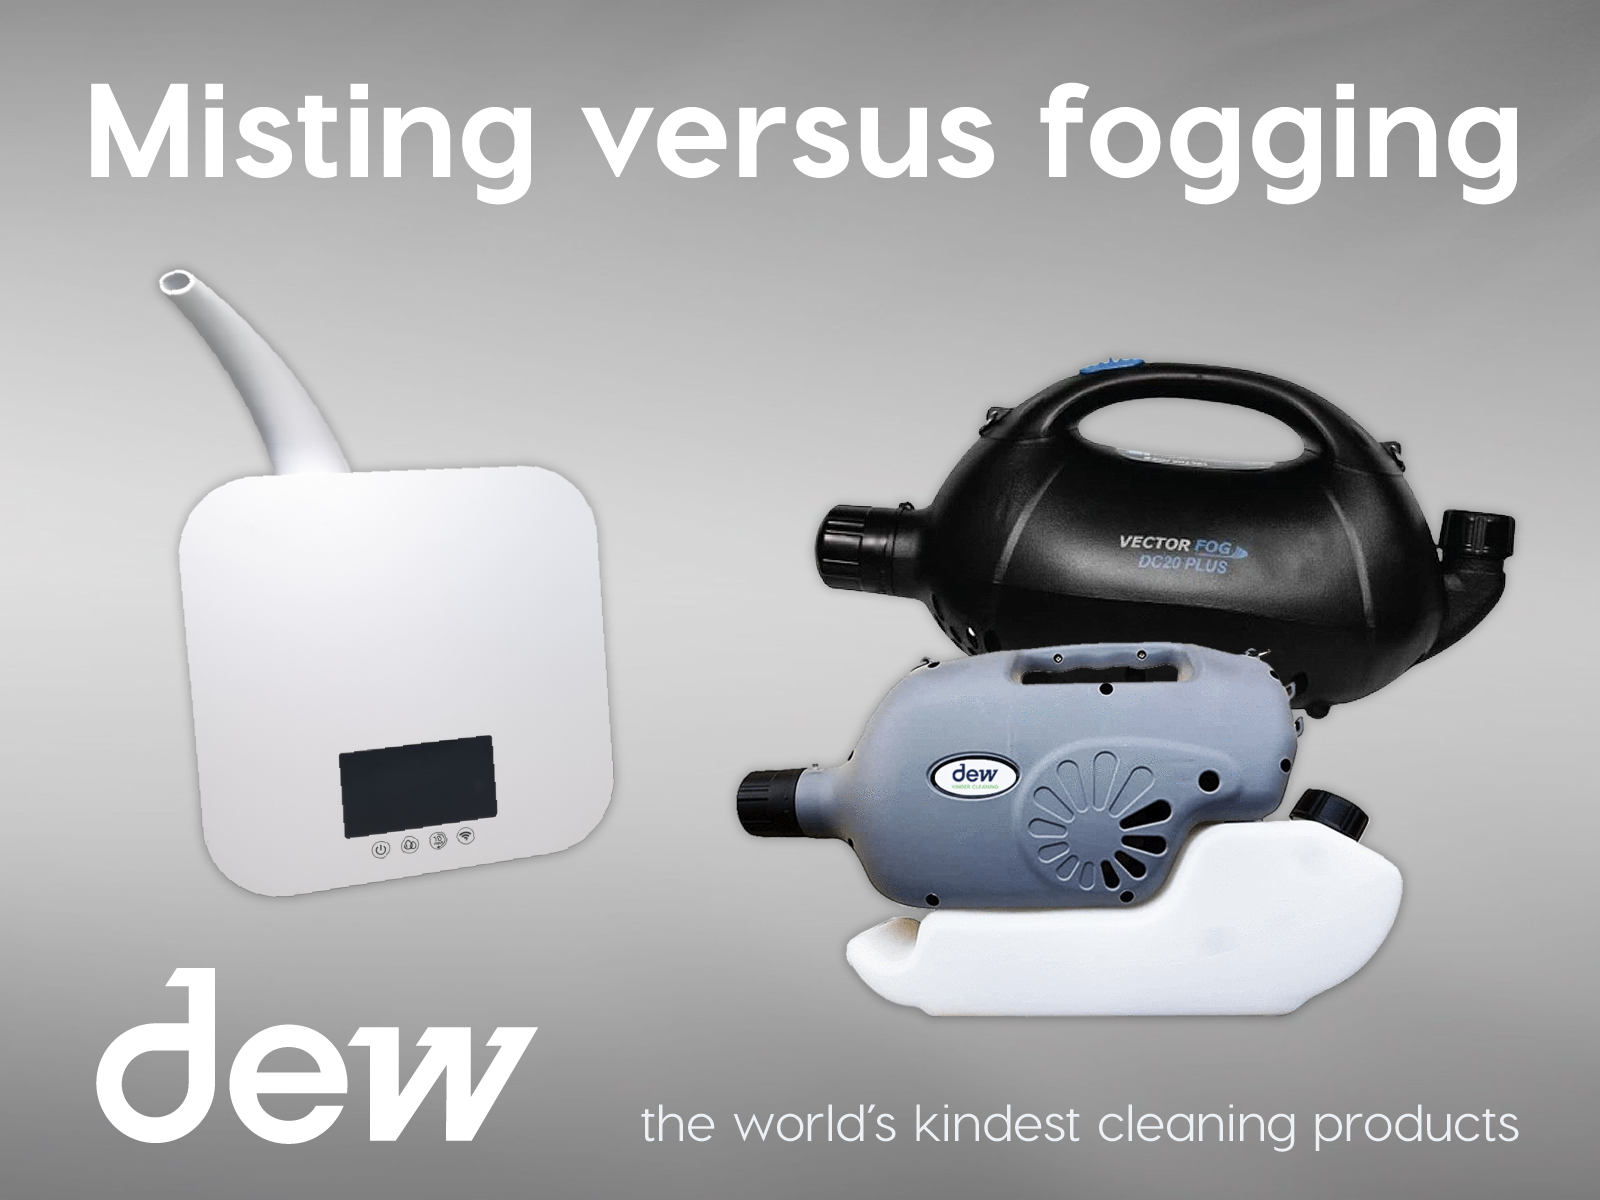 Misting Or Fogging: Which Is For Me?